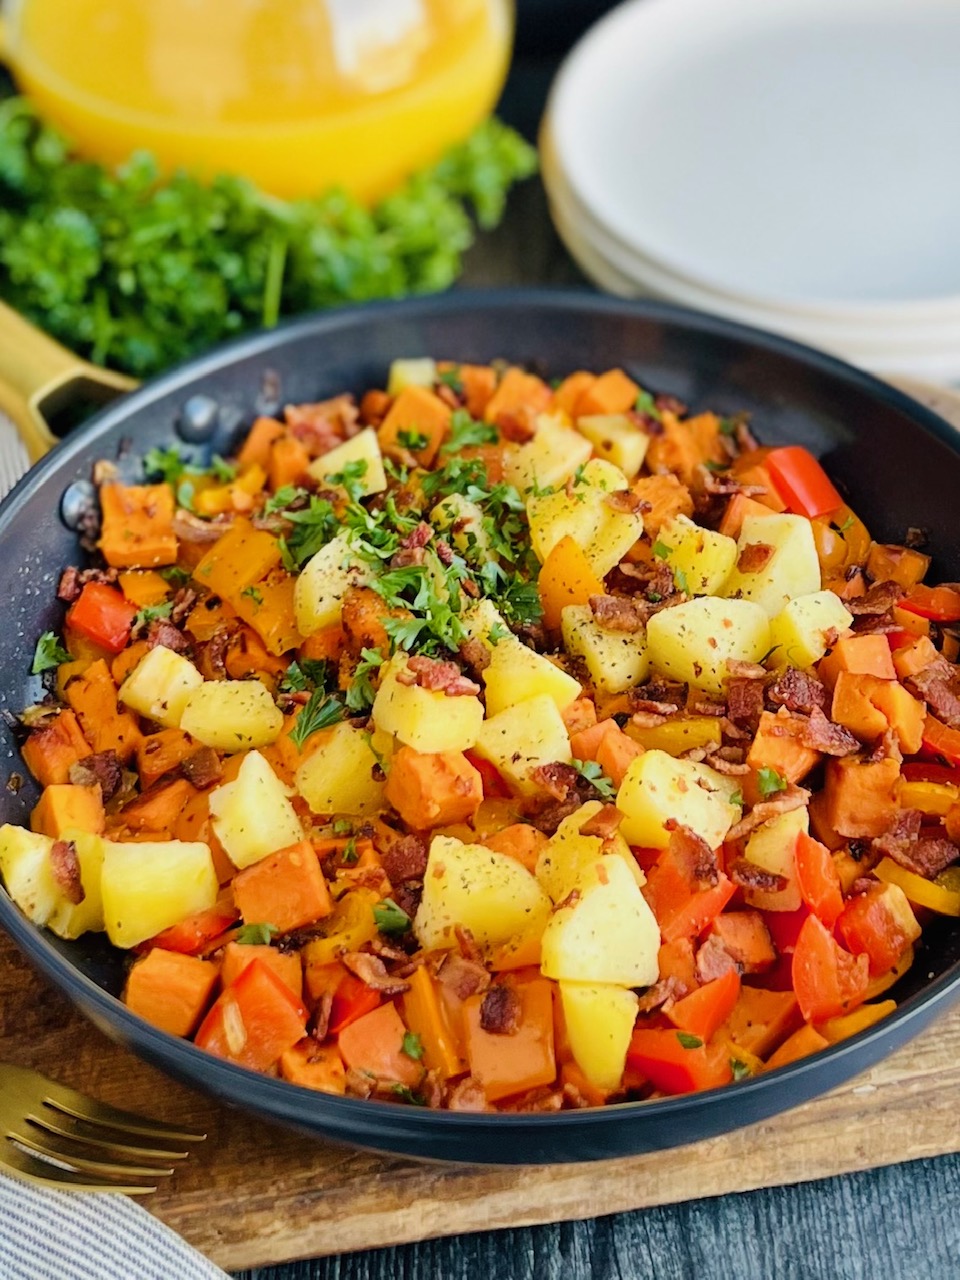 A black frying pan packed with sautéed sweet potatoes, diced apples, red and orange bell peppers, and topped with bits of bacon and Italian parsley next to white breakfast plates.